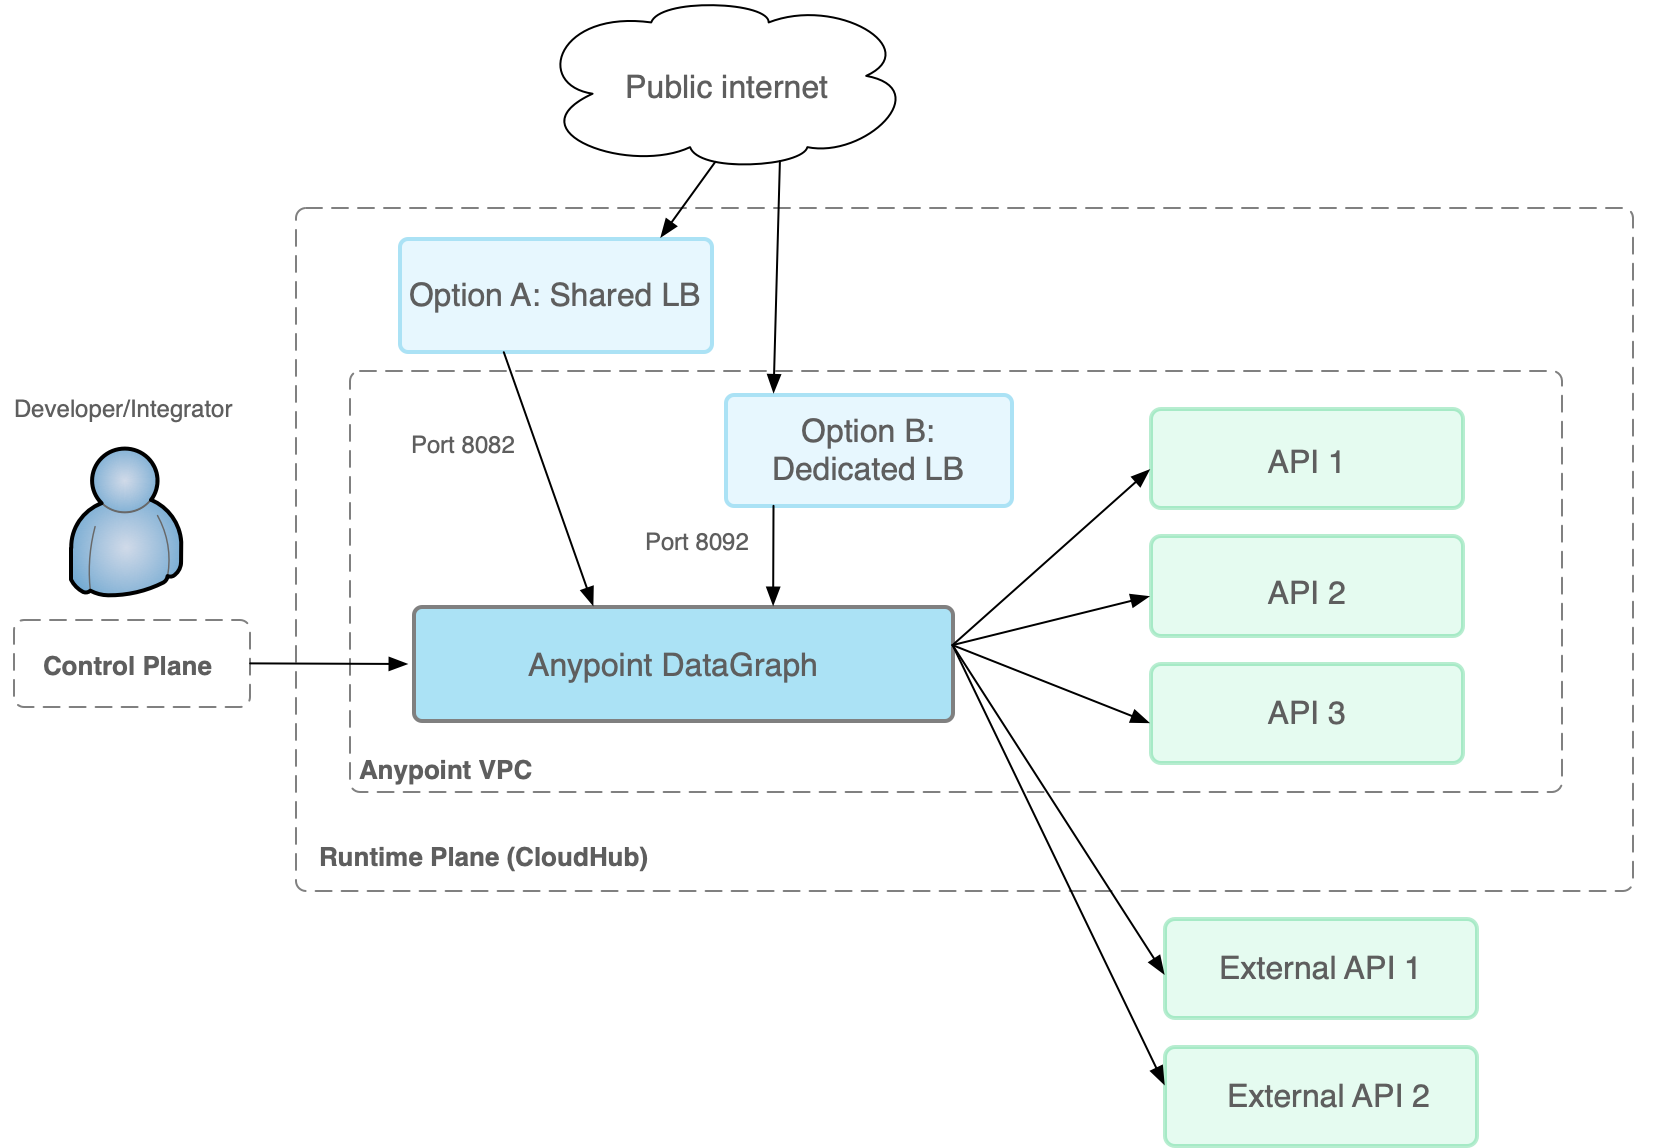 General network architecture for Anypoint DataGraph and Anypoint Platform